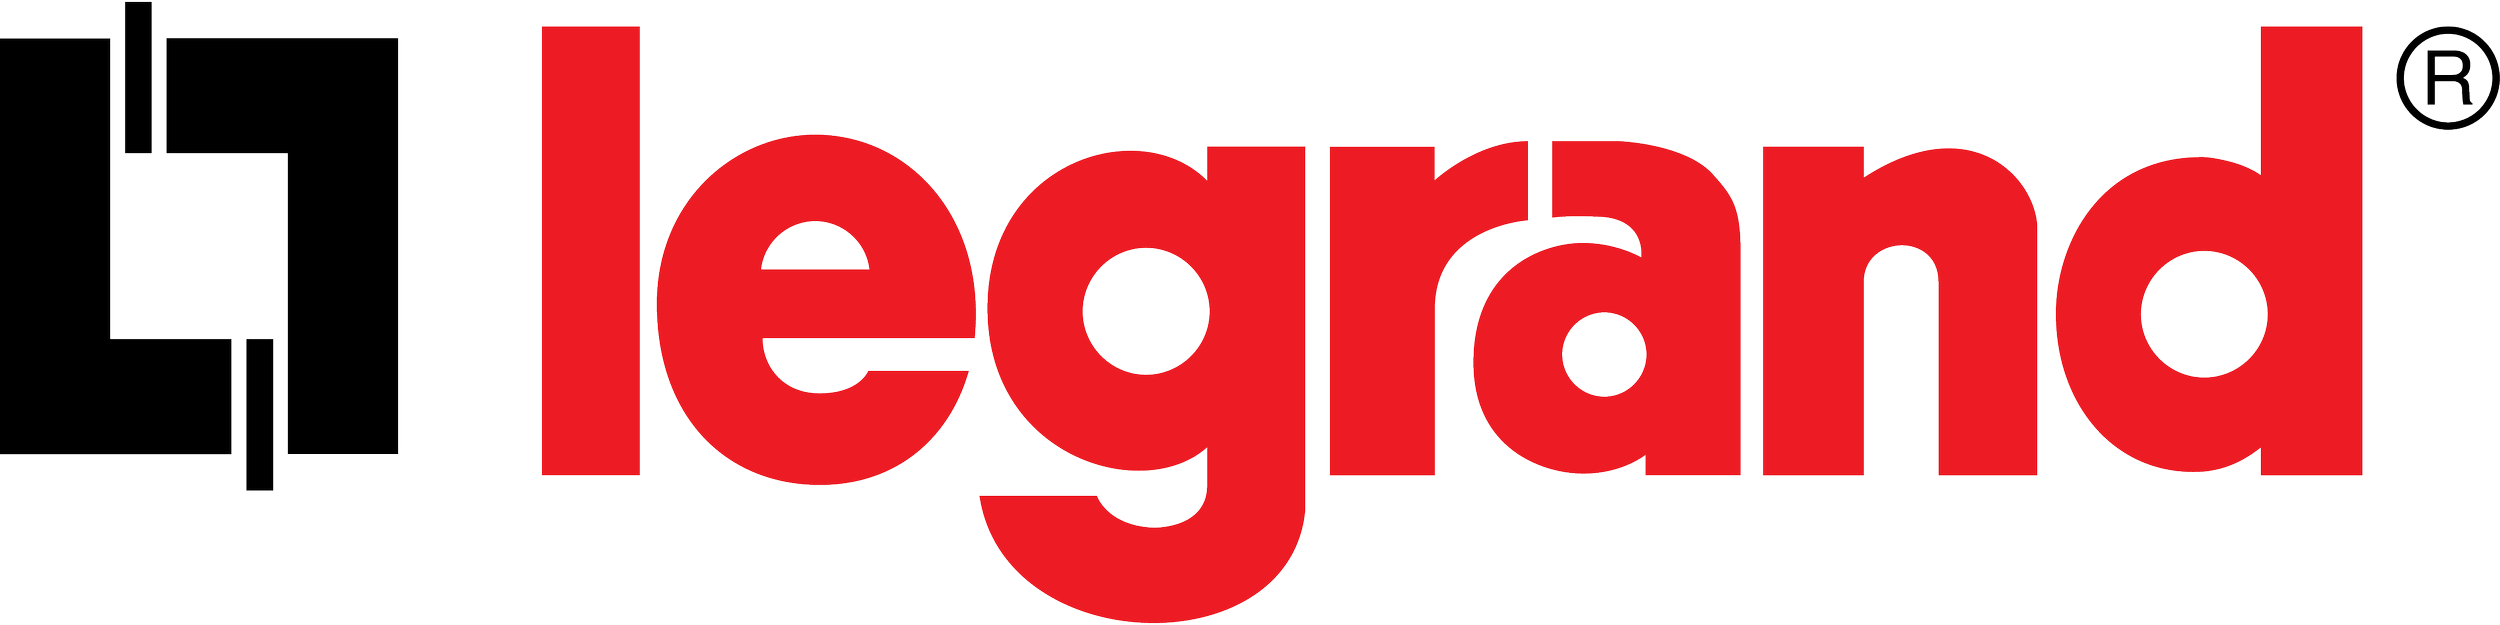 Legrand-Red-PNG.png